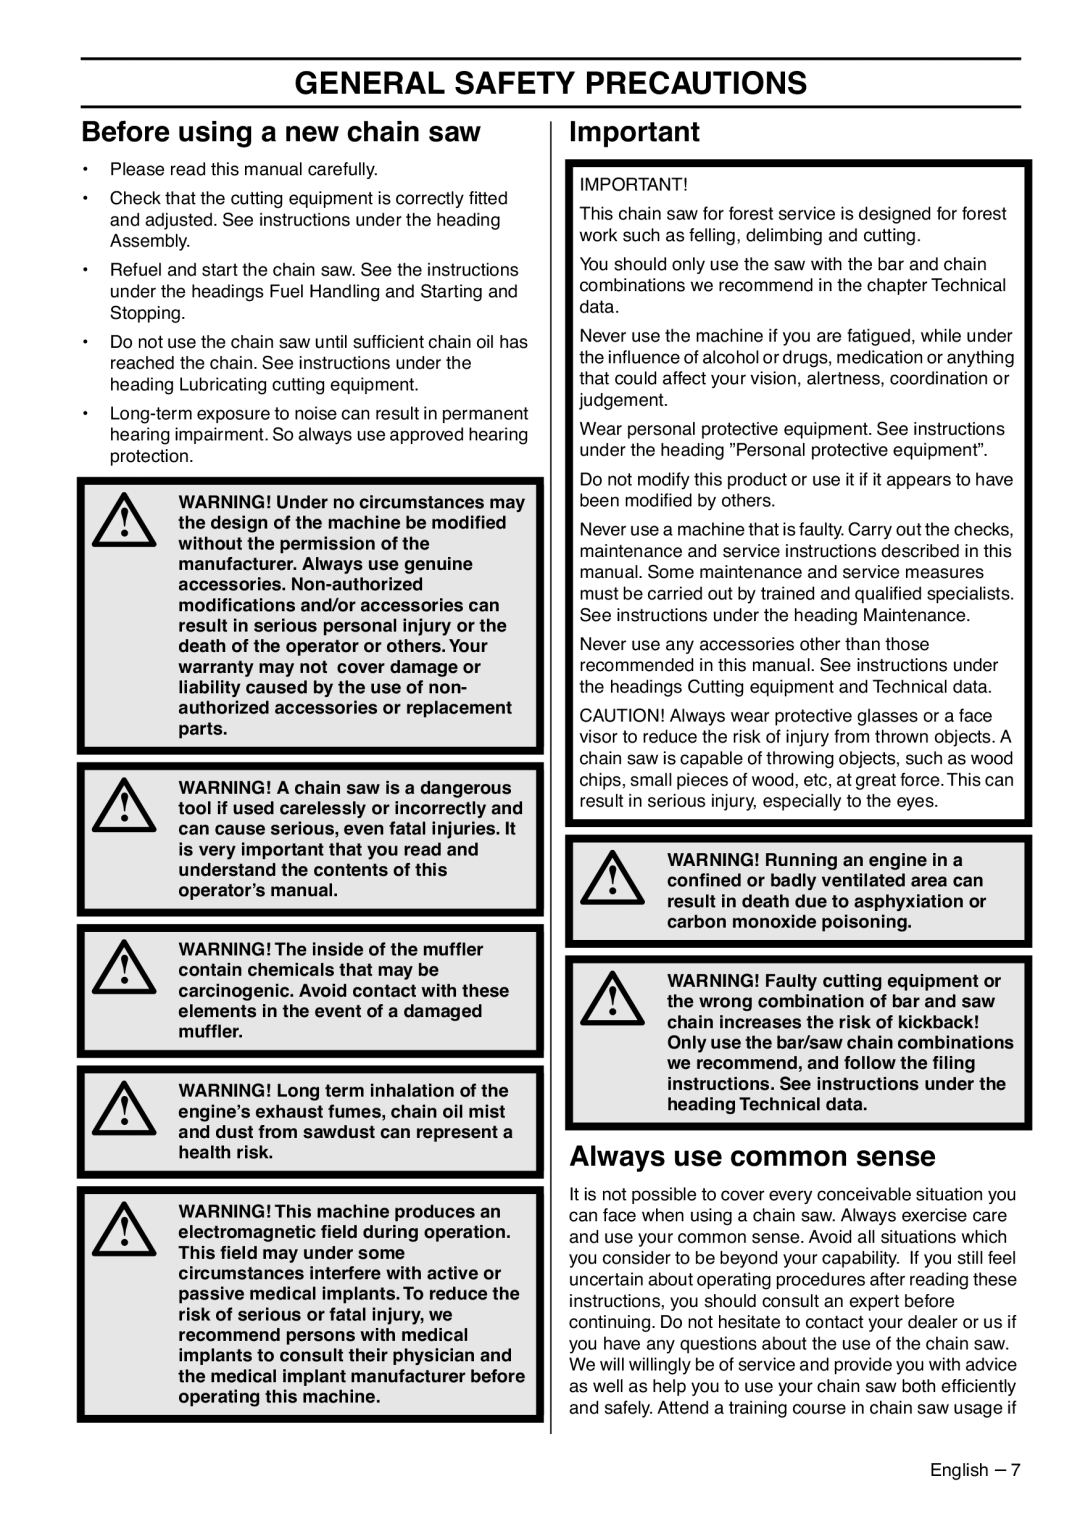 Husqvarna 1153183-95 manual General Safety Precautions, Before using a new chain saw, Always use common sense 